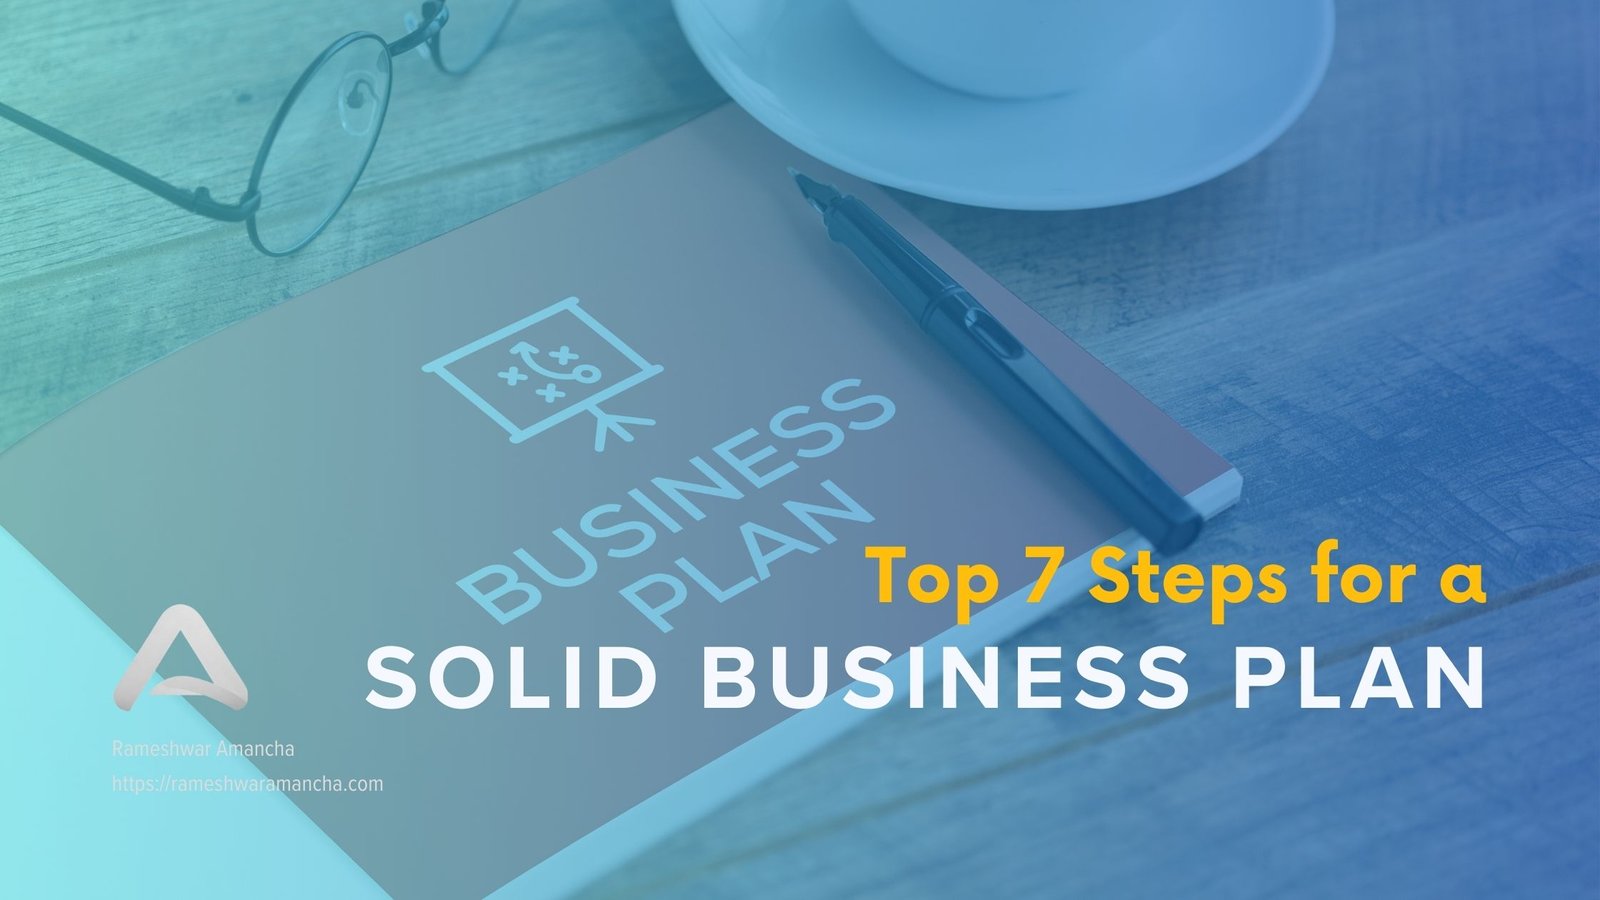 Top 7 Steps for a solid business plan